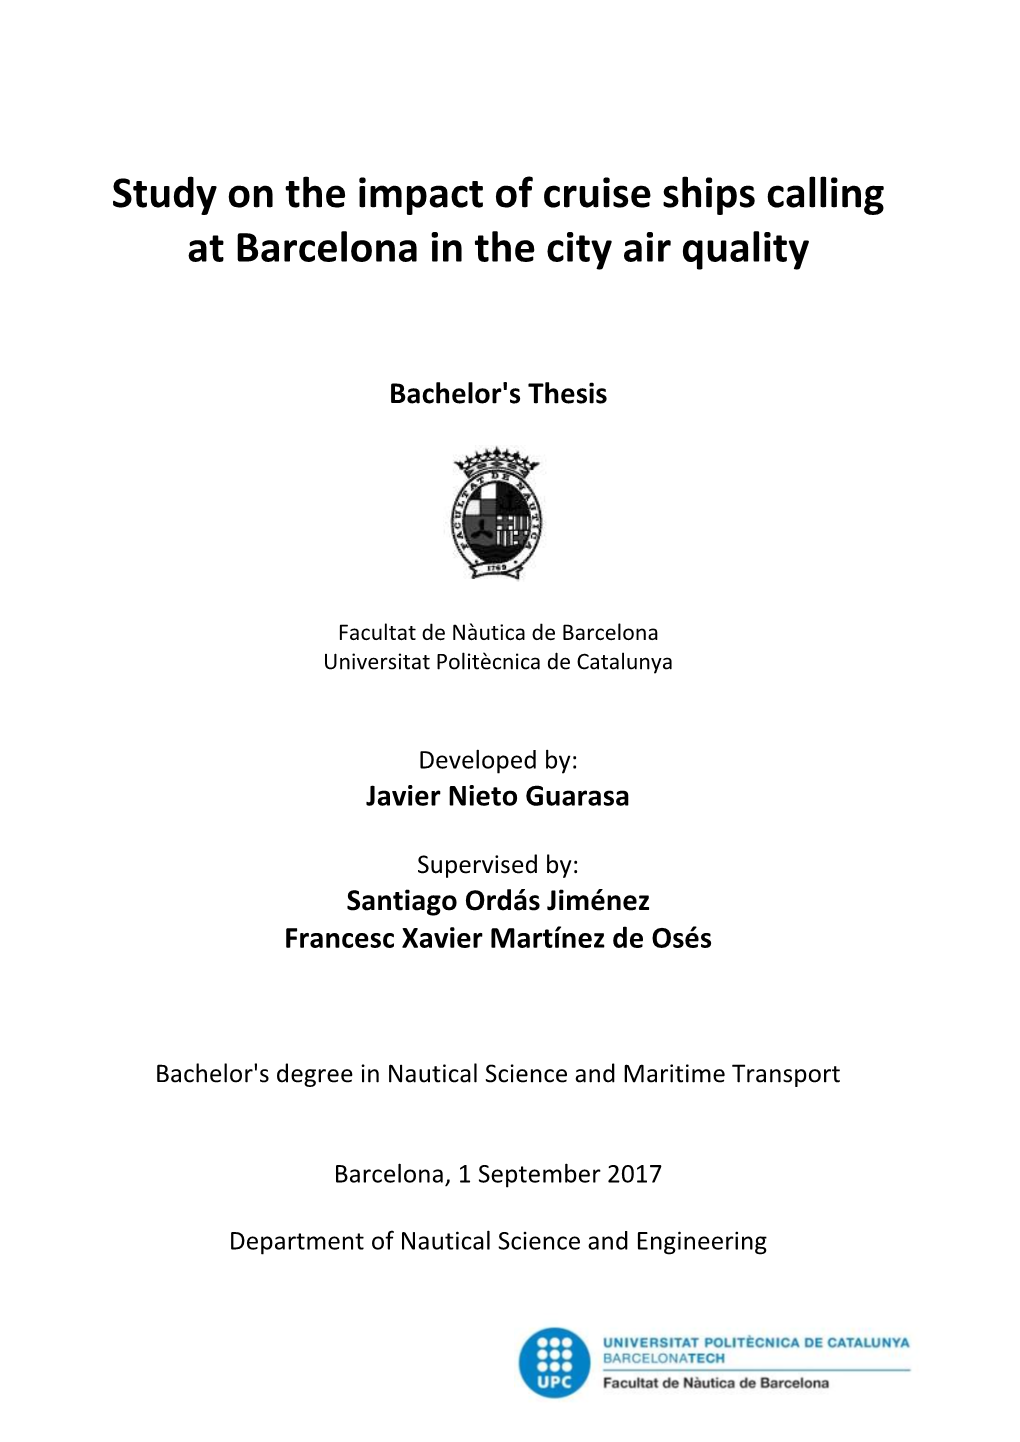 Study on the Impact of Cruise Ships Calling at Barcelona in the City Air Quality